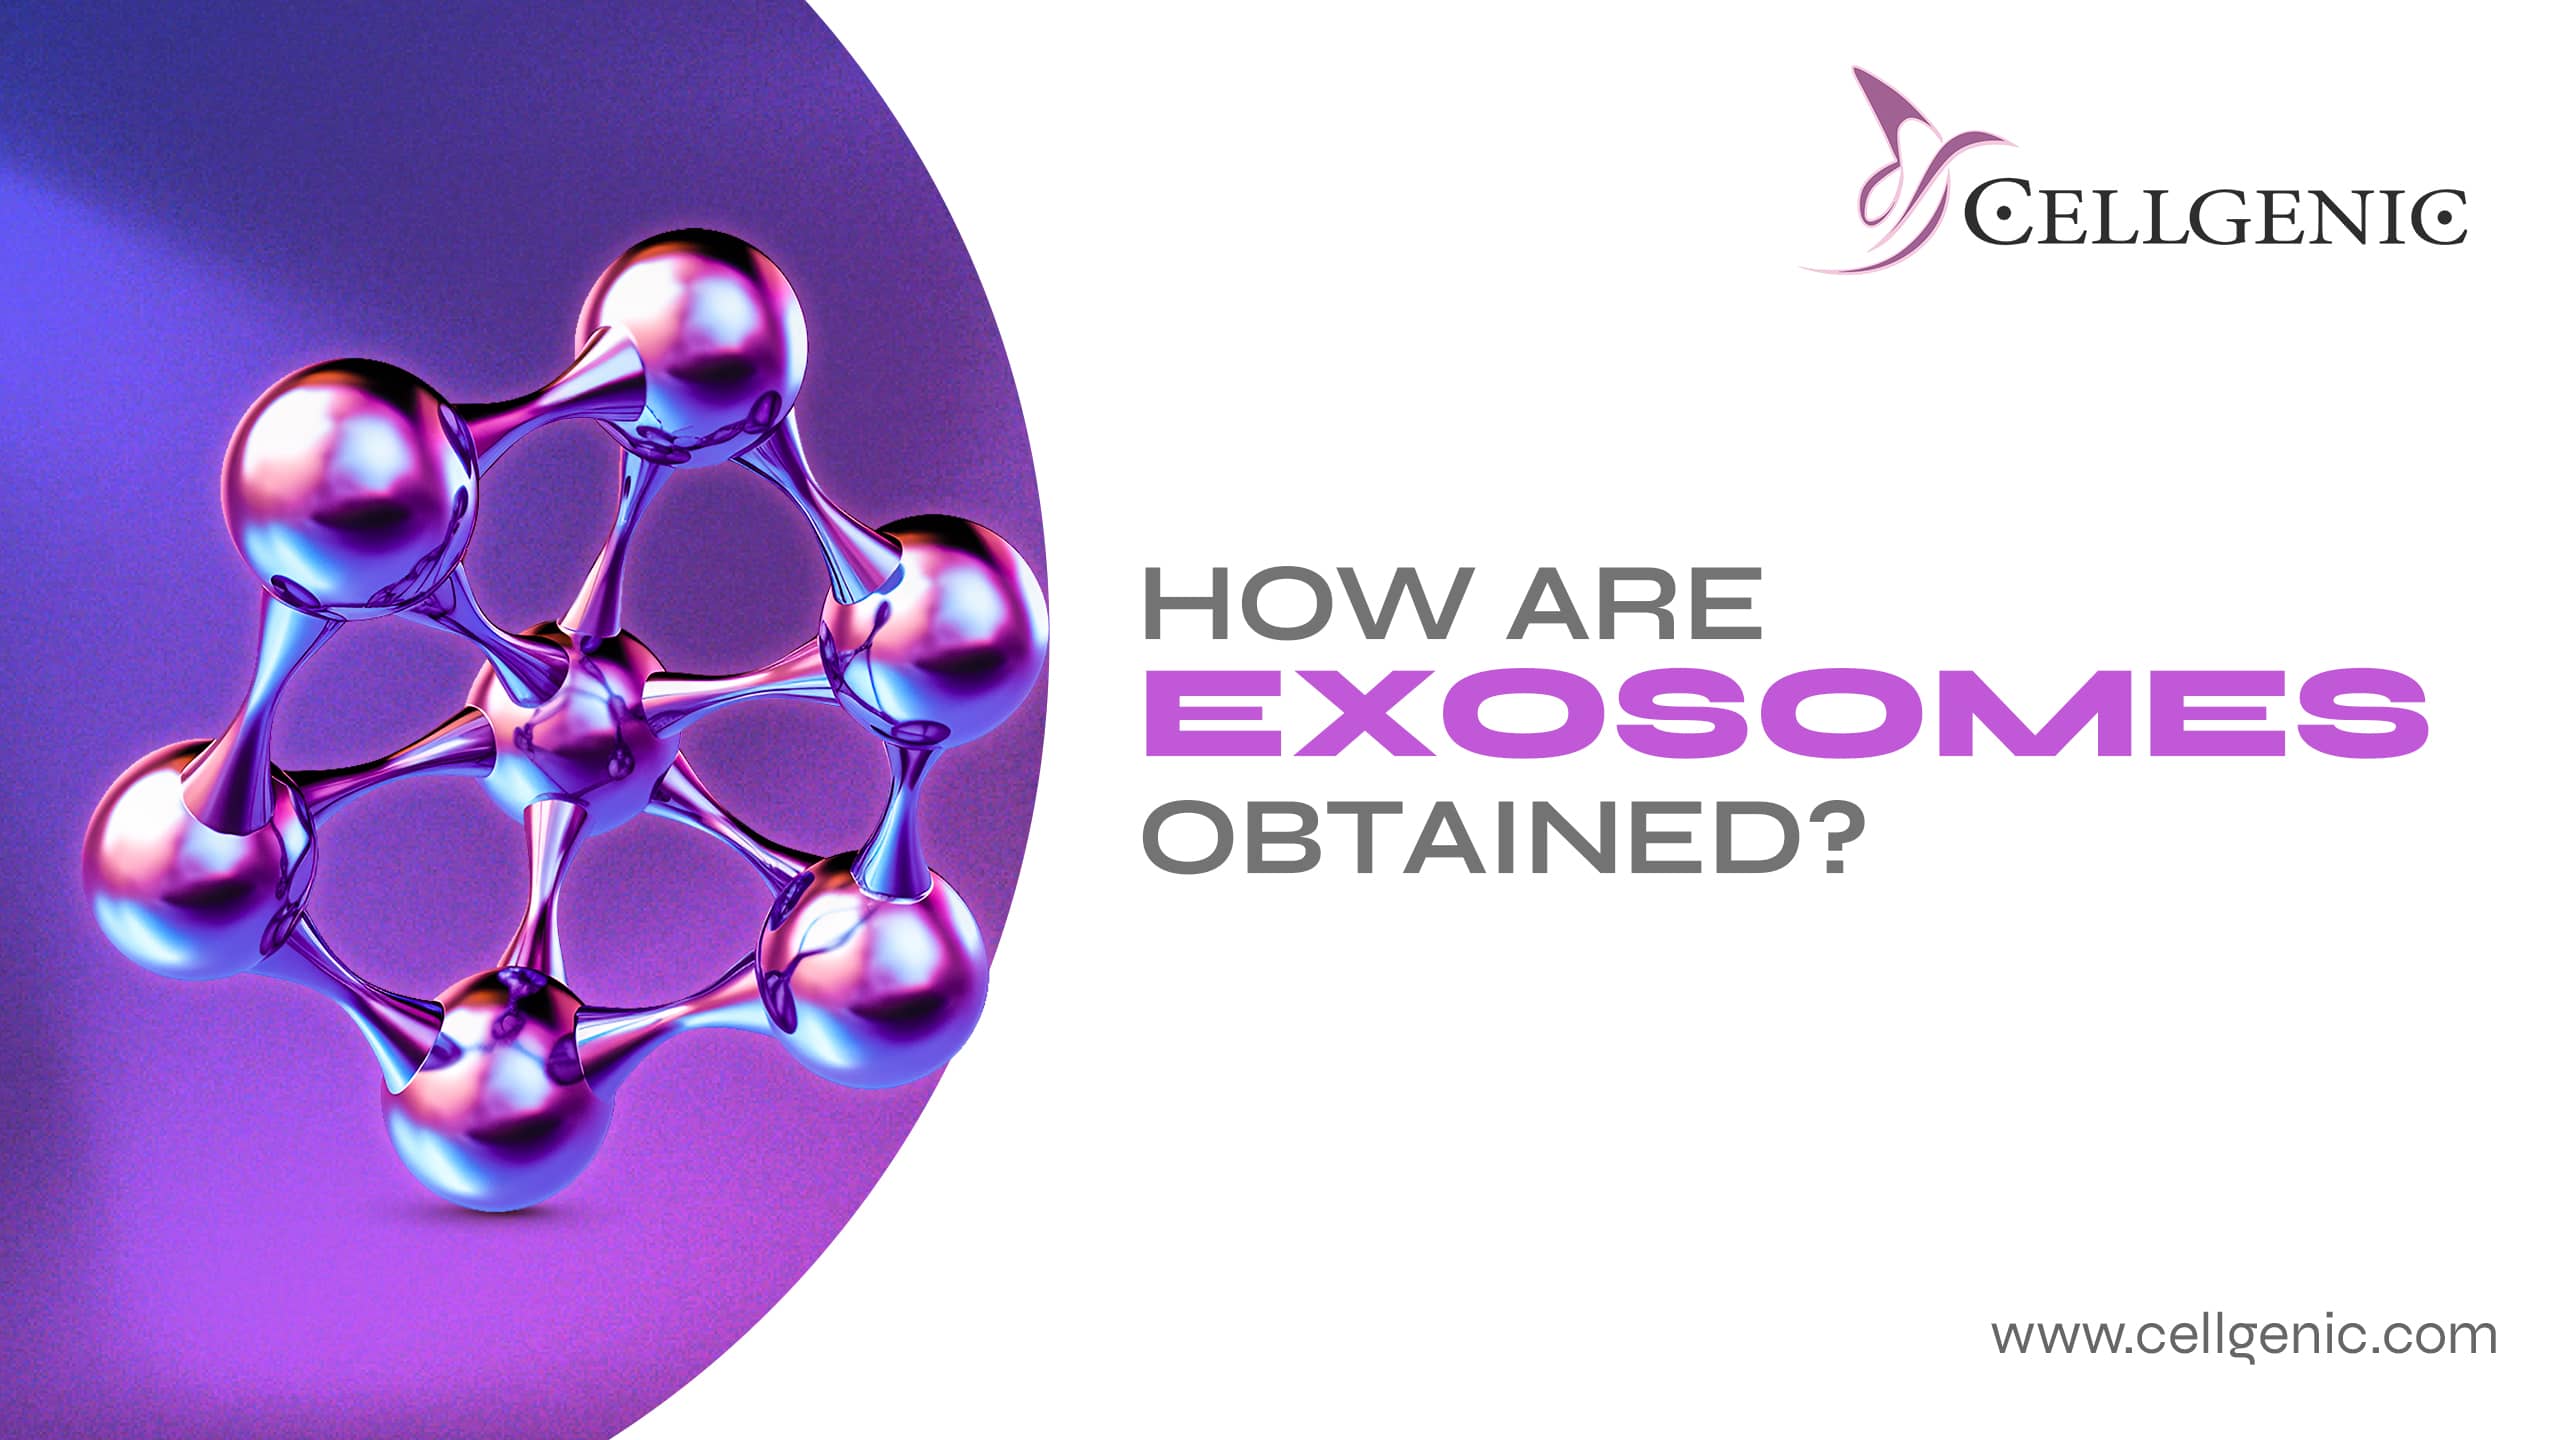 How are exosomes obtained?